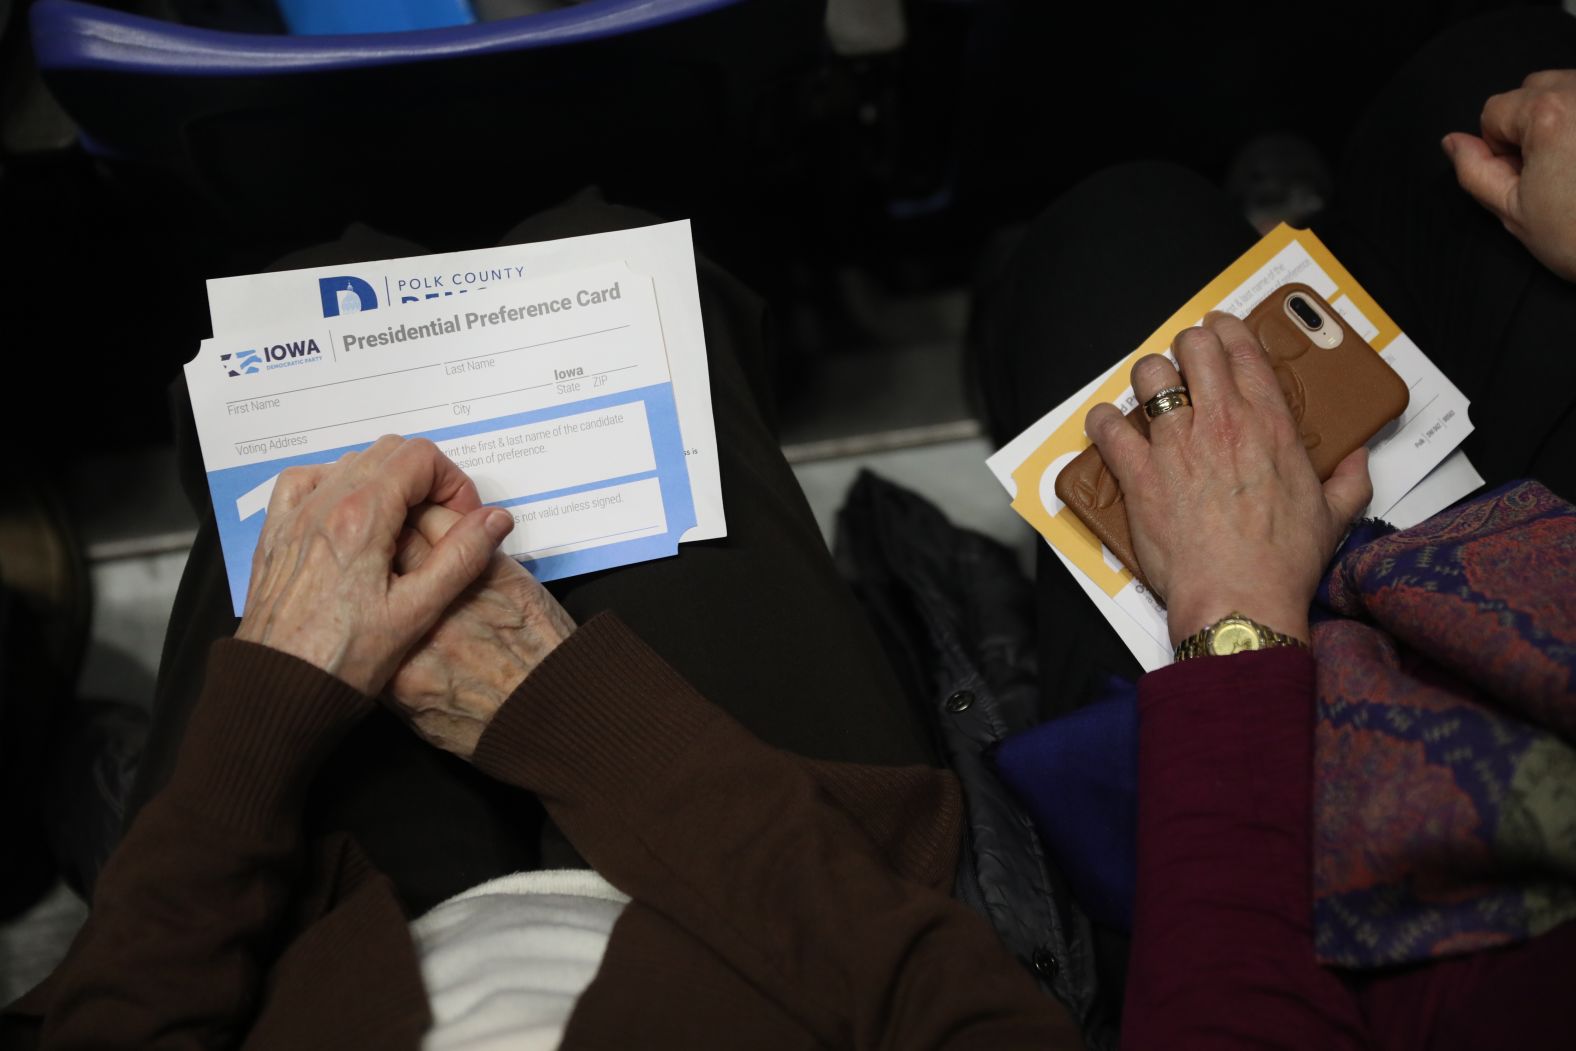 Caucus participants hold presidential preference cards in Des Moines.